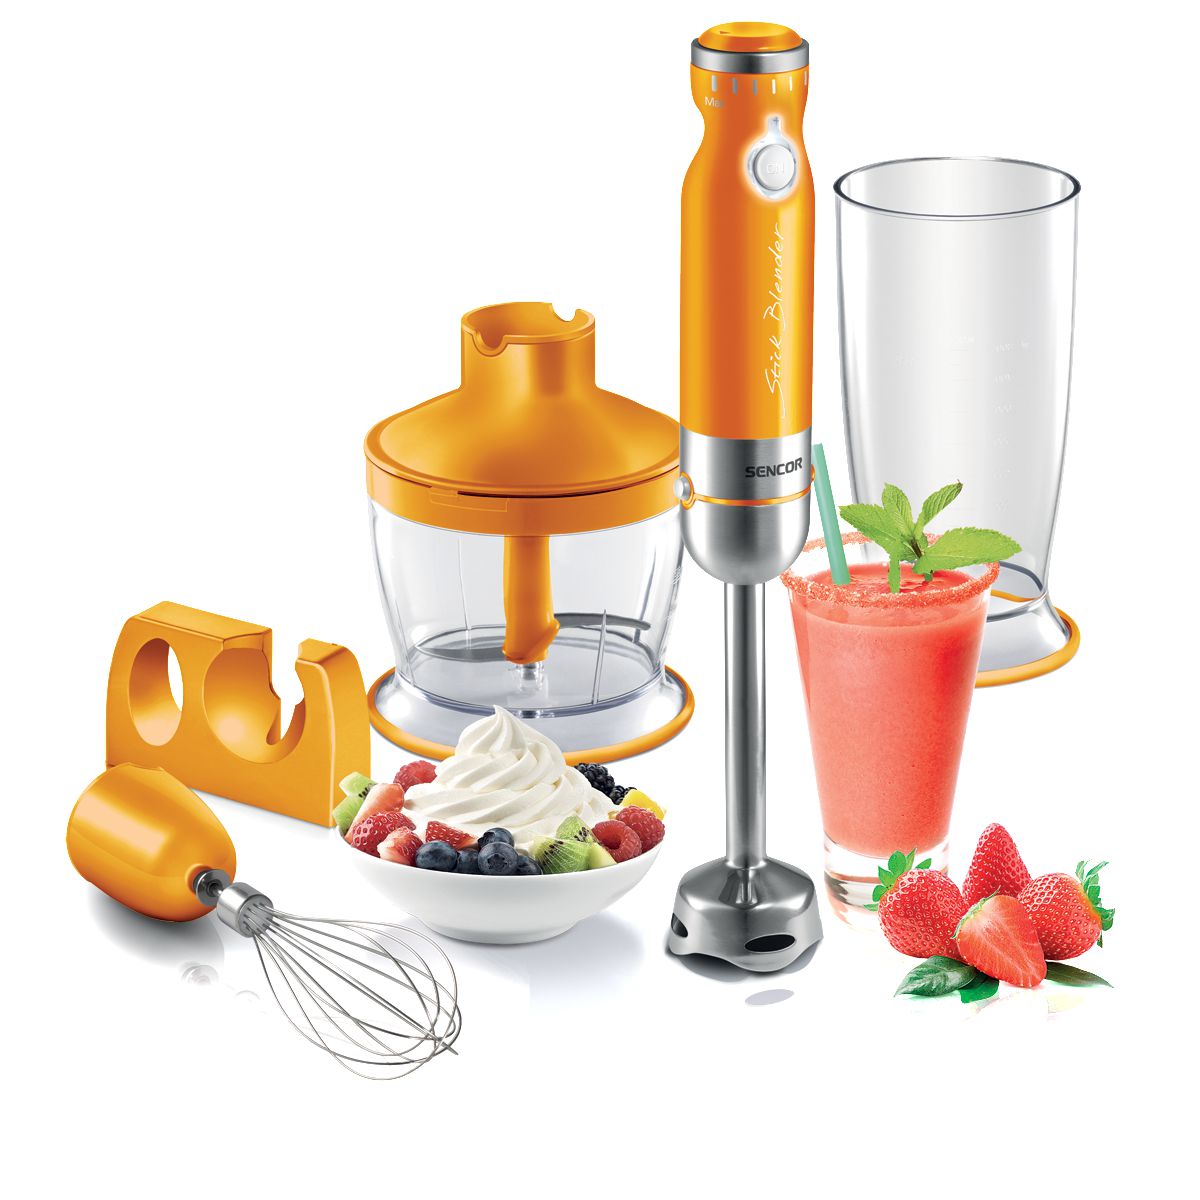 Sencor SHB4363OR Stick Blender with Accessories